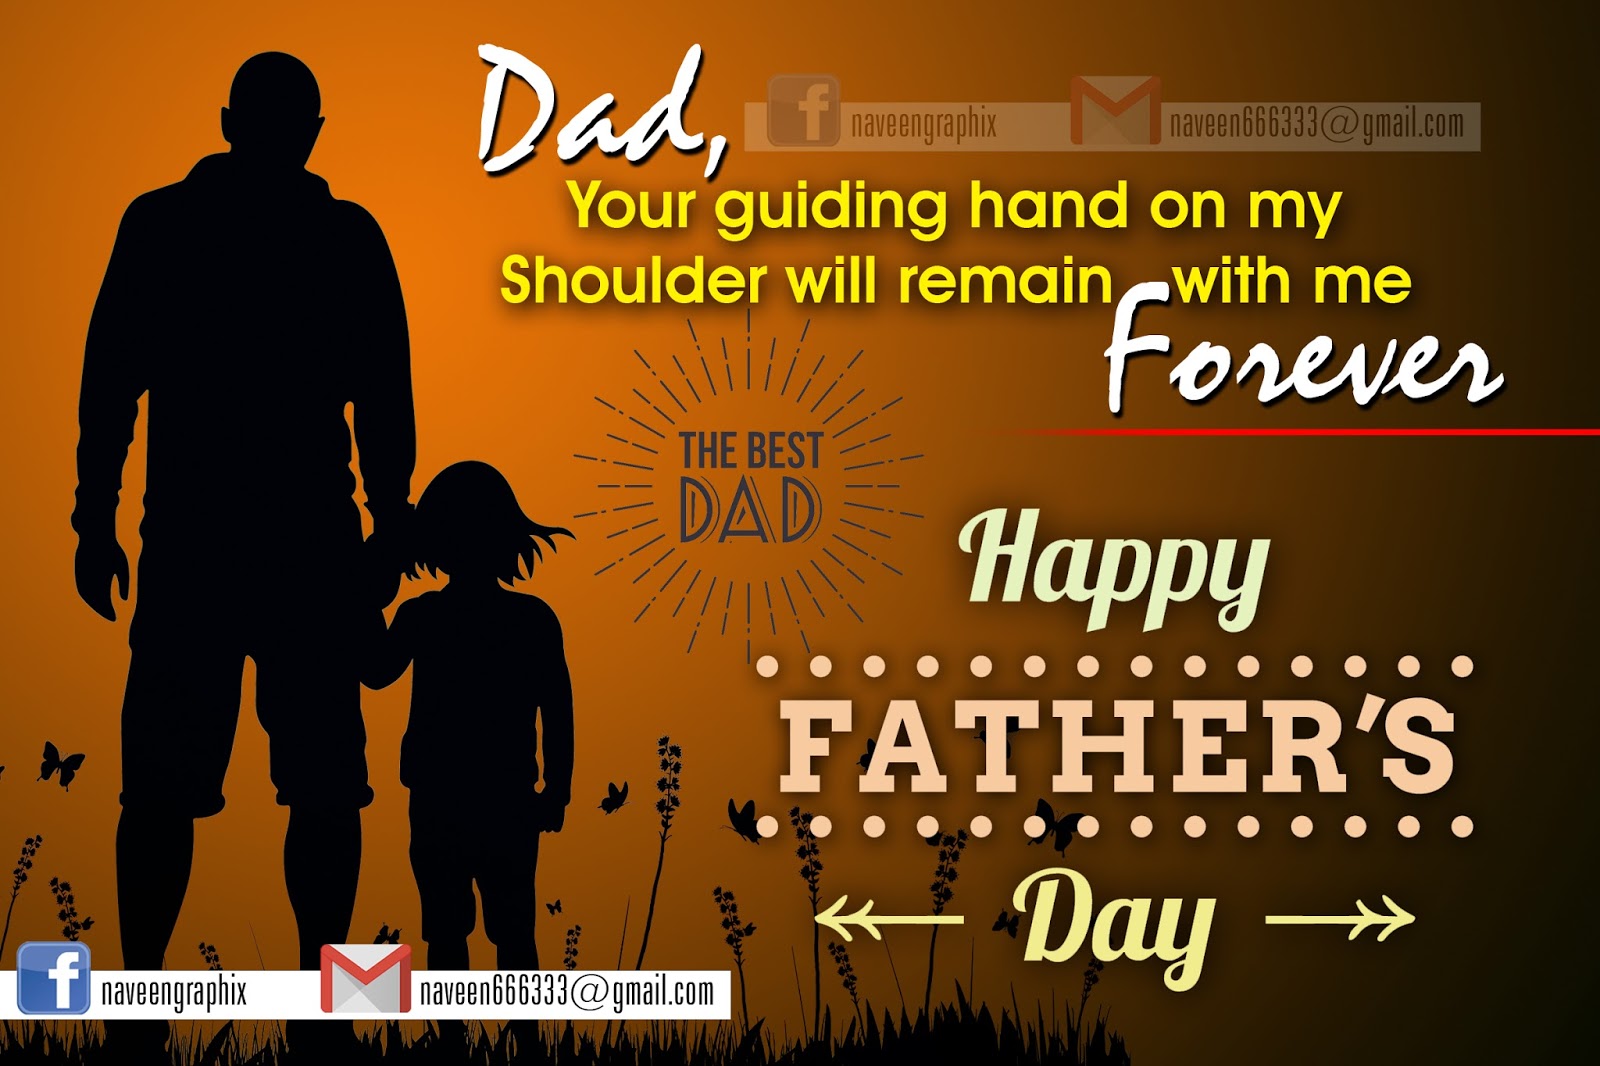 dad and daughter quotes wallpapers,font,text,poster,advertising,album cover